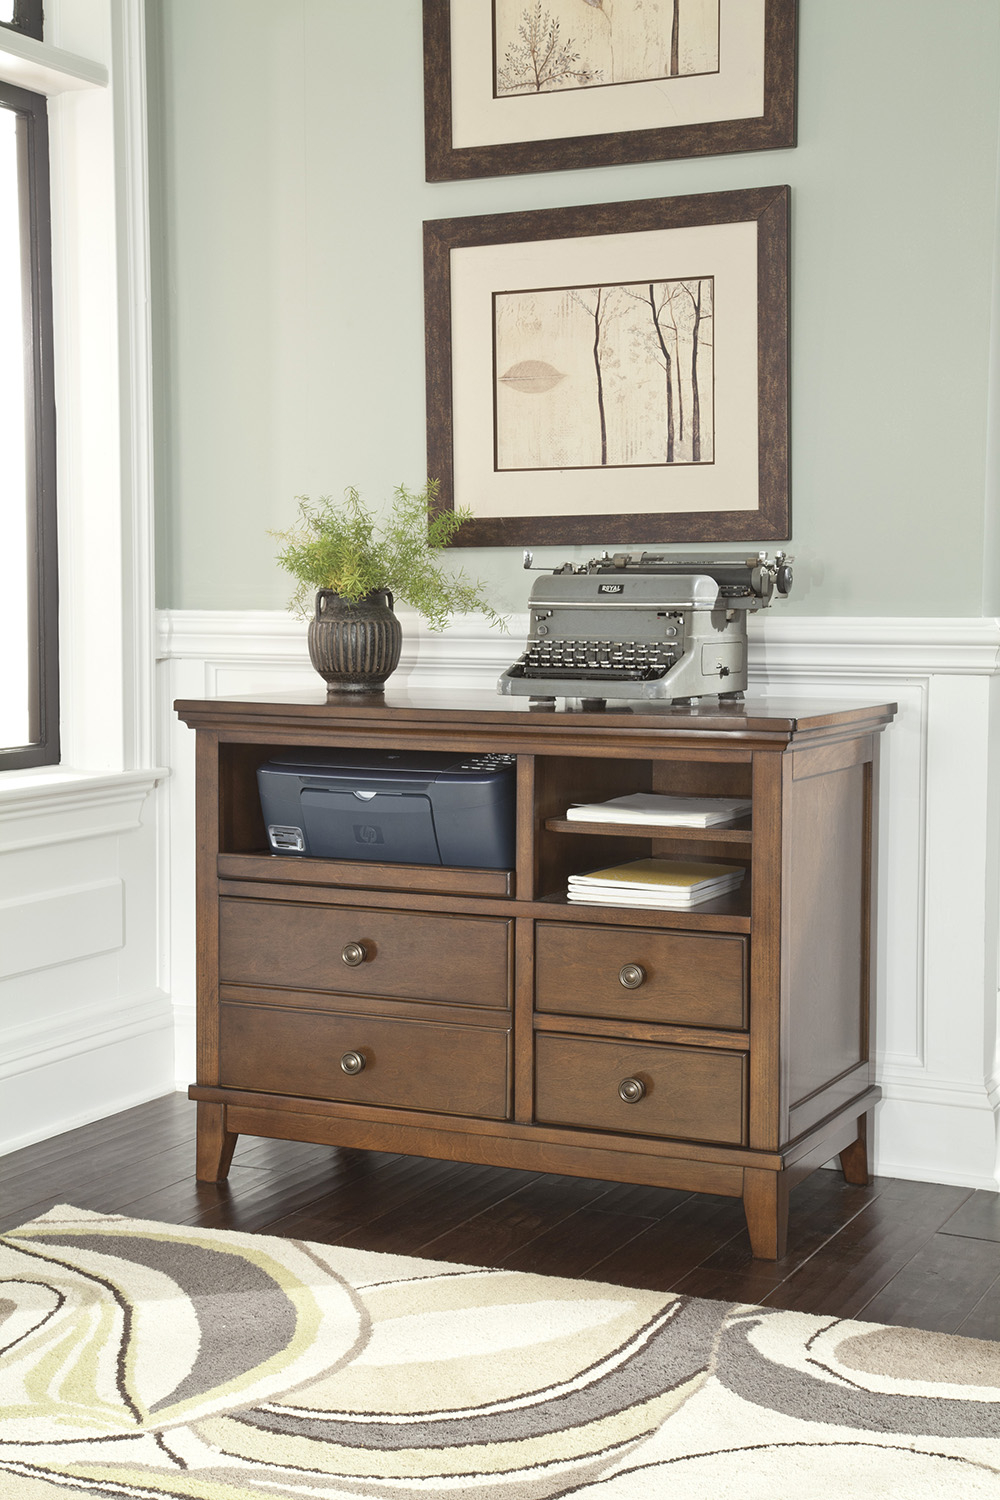 Portland Ors Leader In New Home And Office Furniture City pertaining to sizing 1000 X 1500